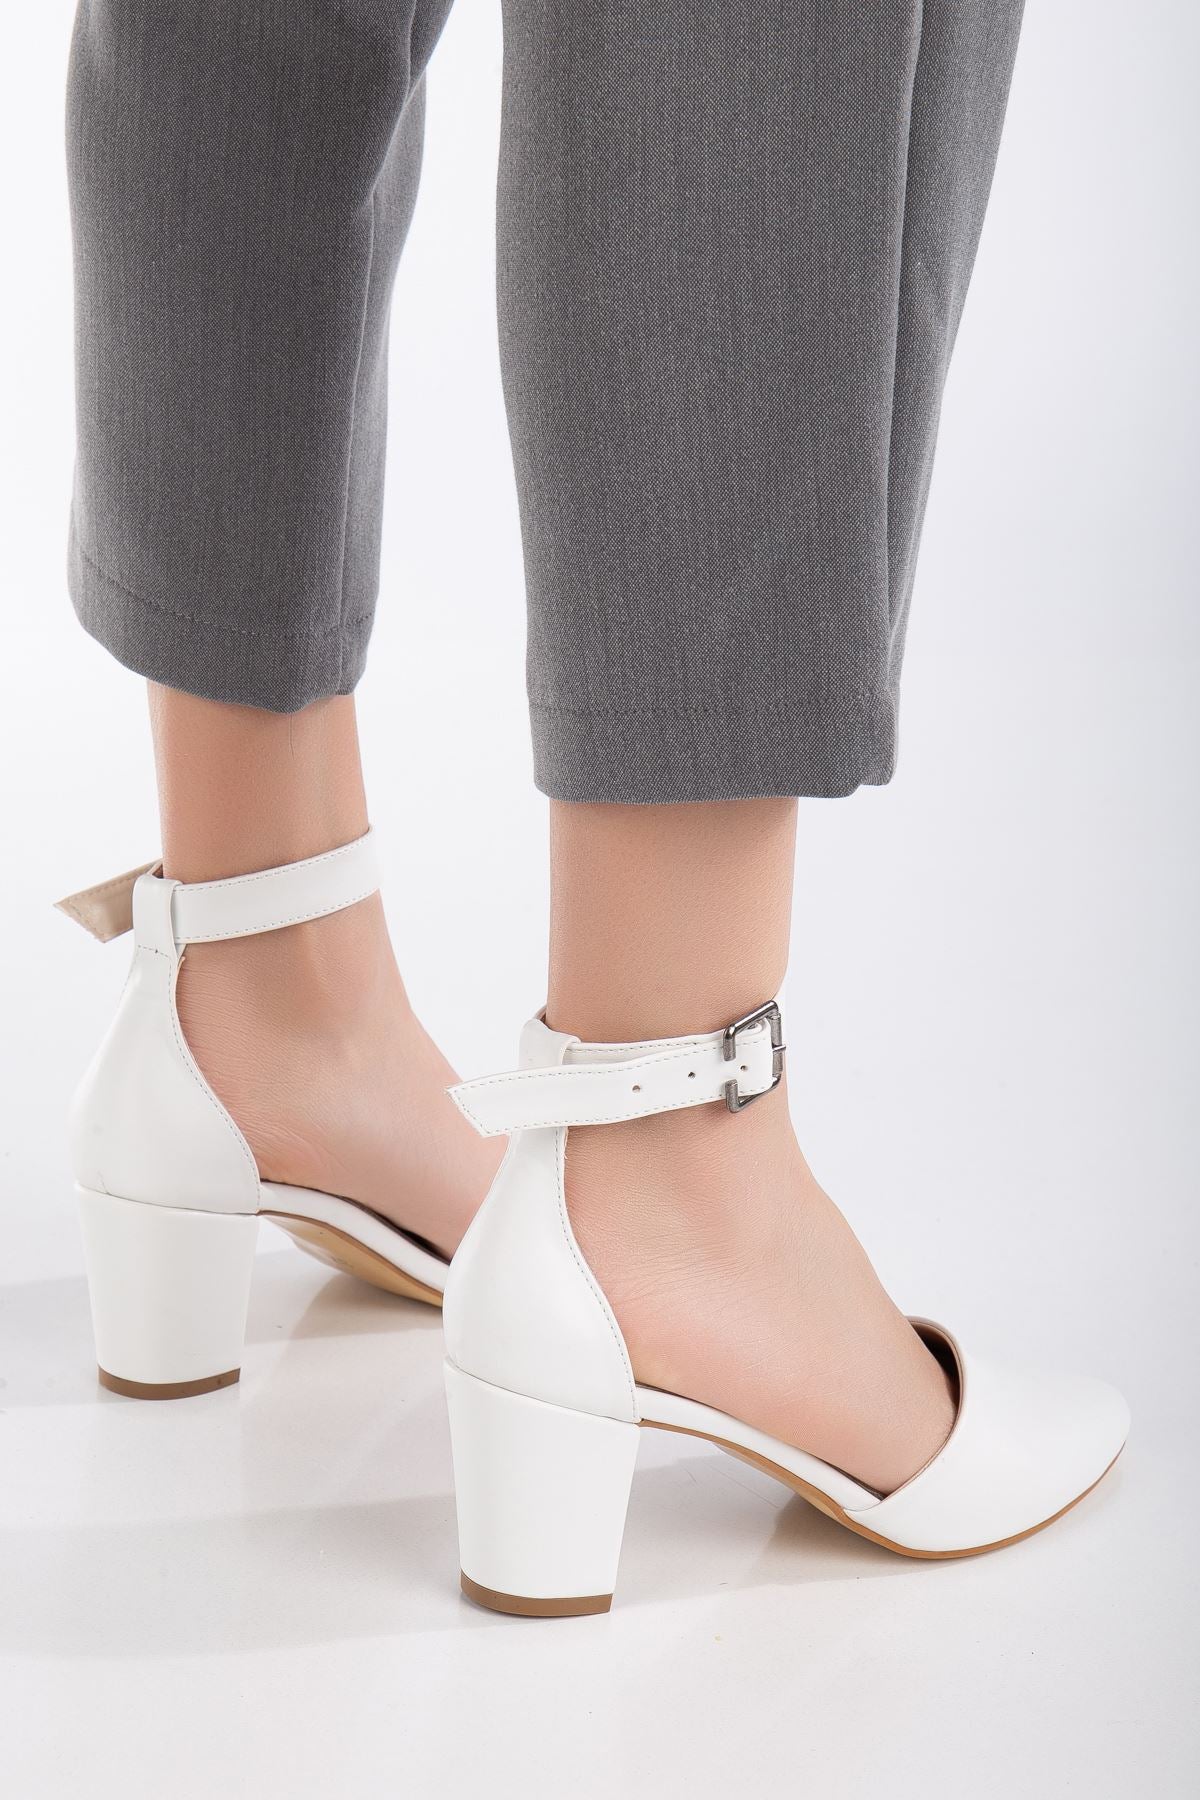 Lottis White Leather Detailed Heeled Women's Shoes - STREETMODE™